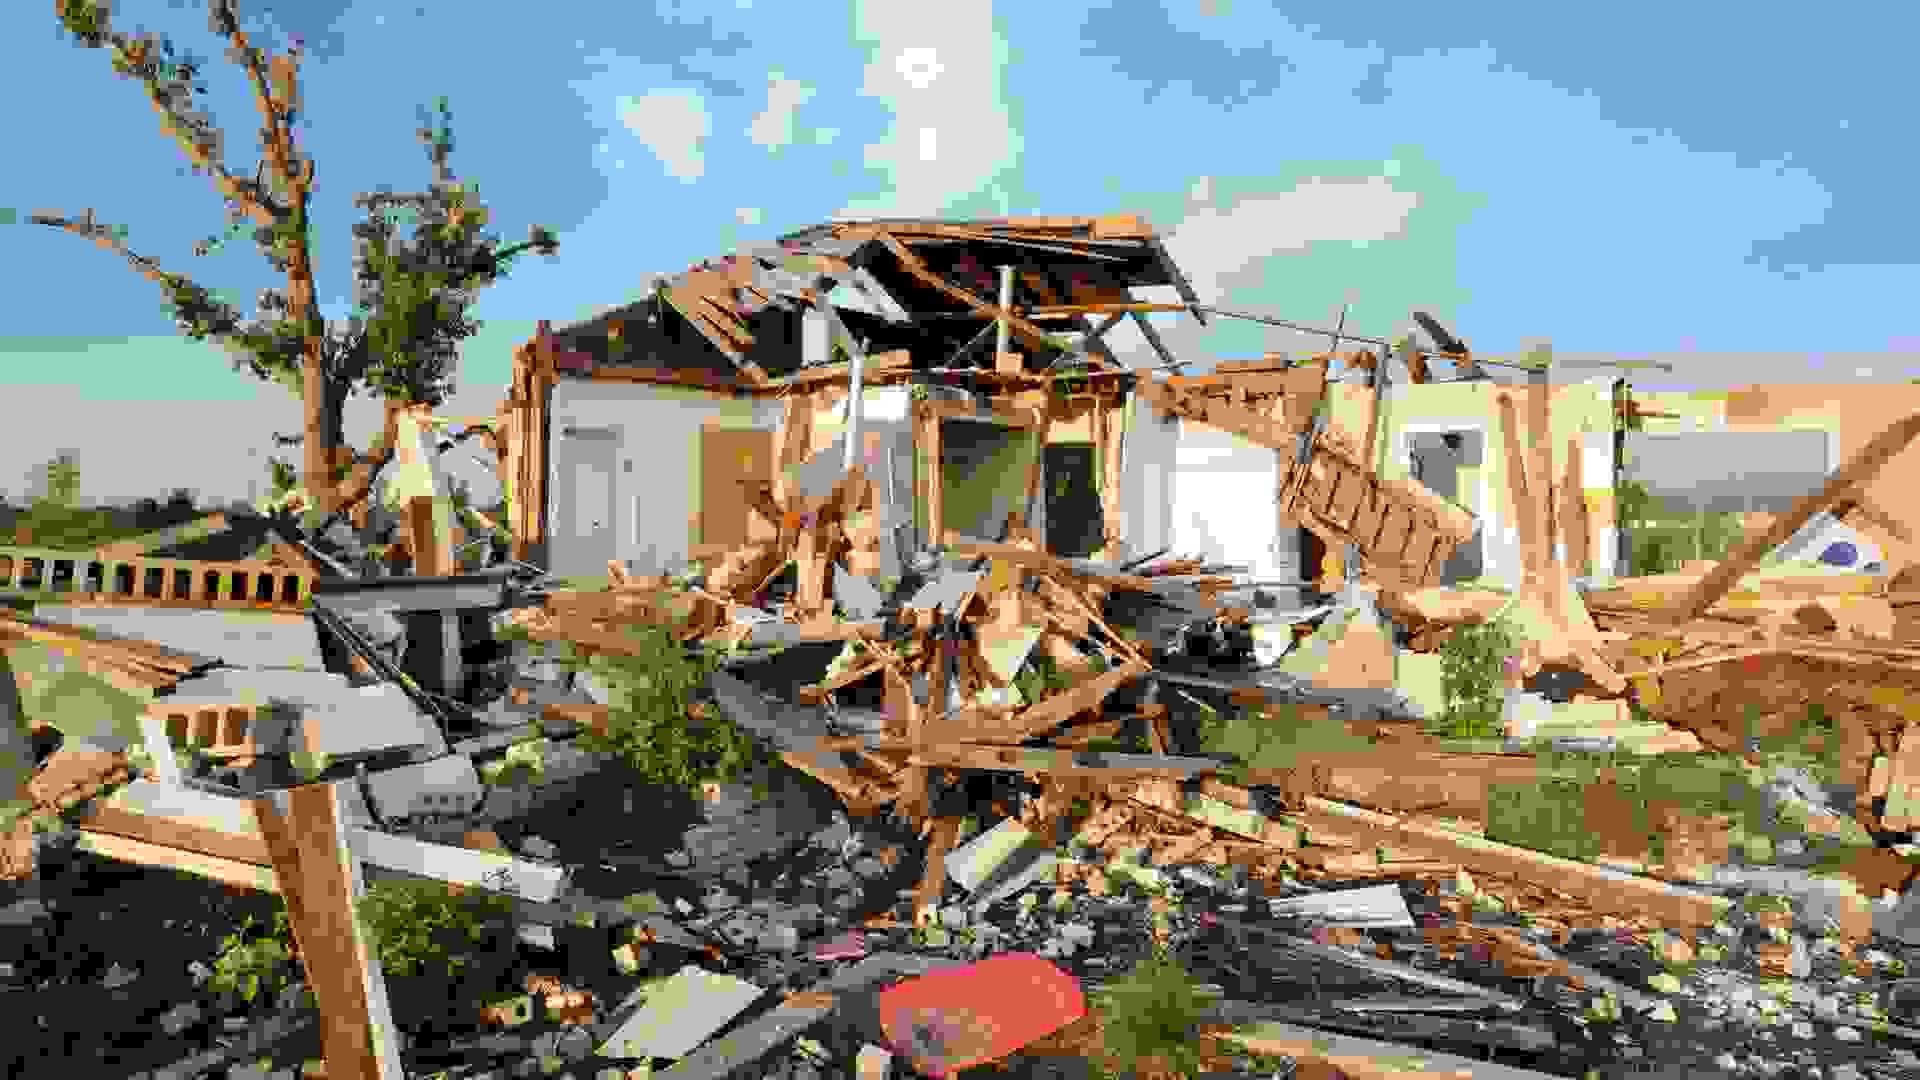 "Close up of home destroyed by tornado, horizontal panorama.